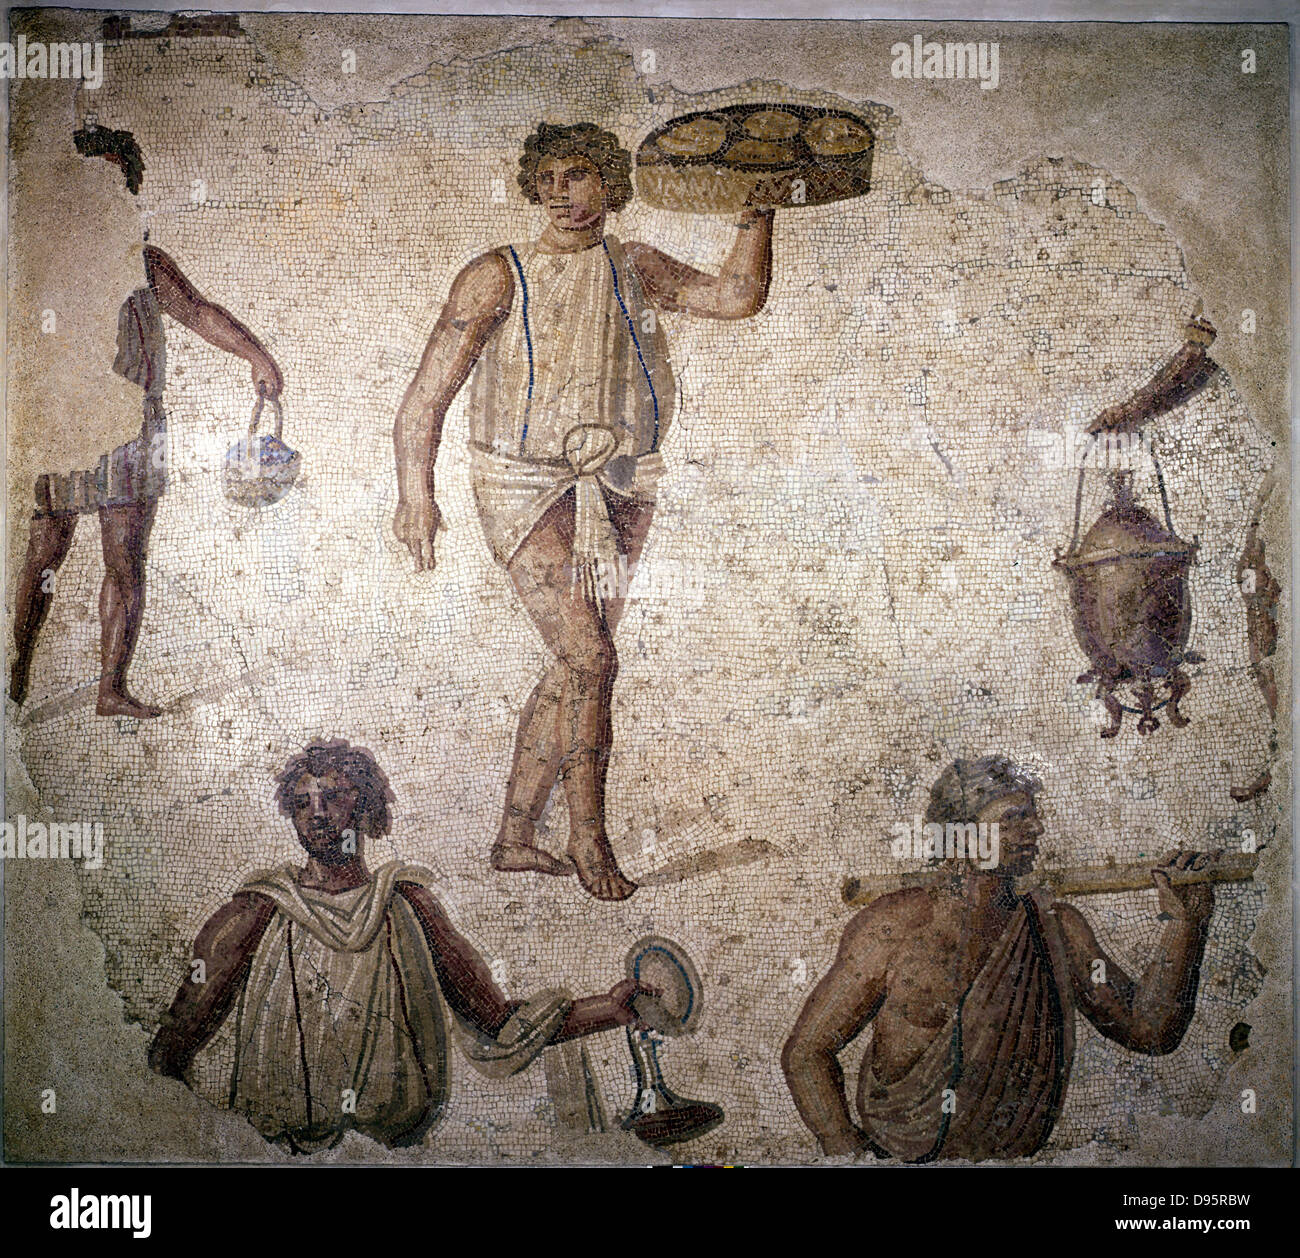 Servants/slaves making preparations for a feast. Mosaic. Carthage. 2nd century AD. Louvre Stock Photo